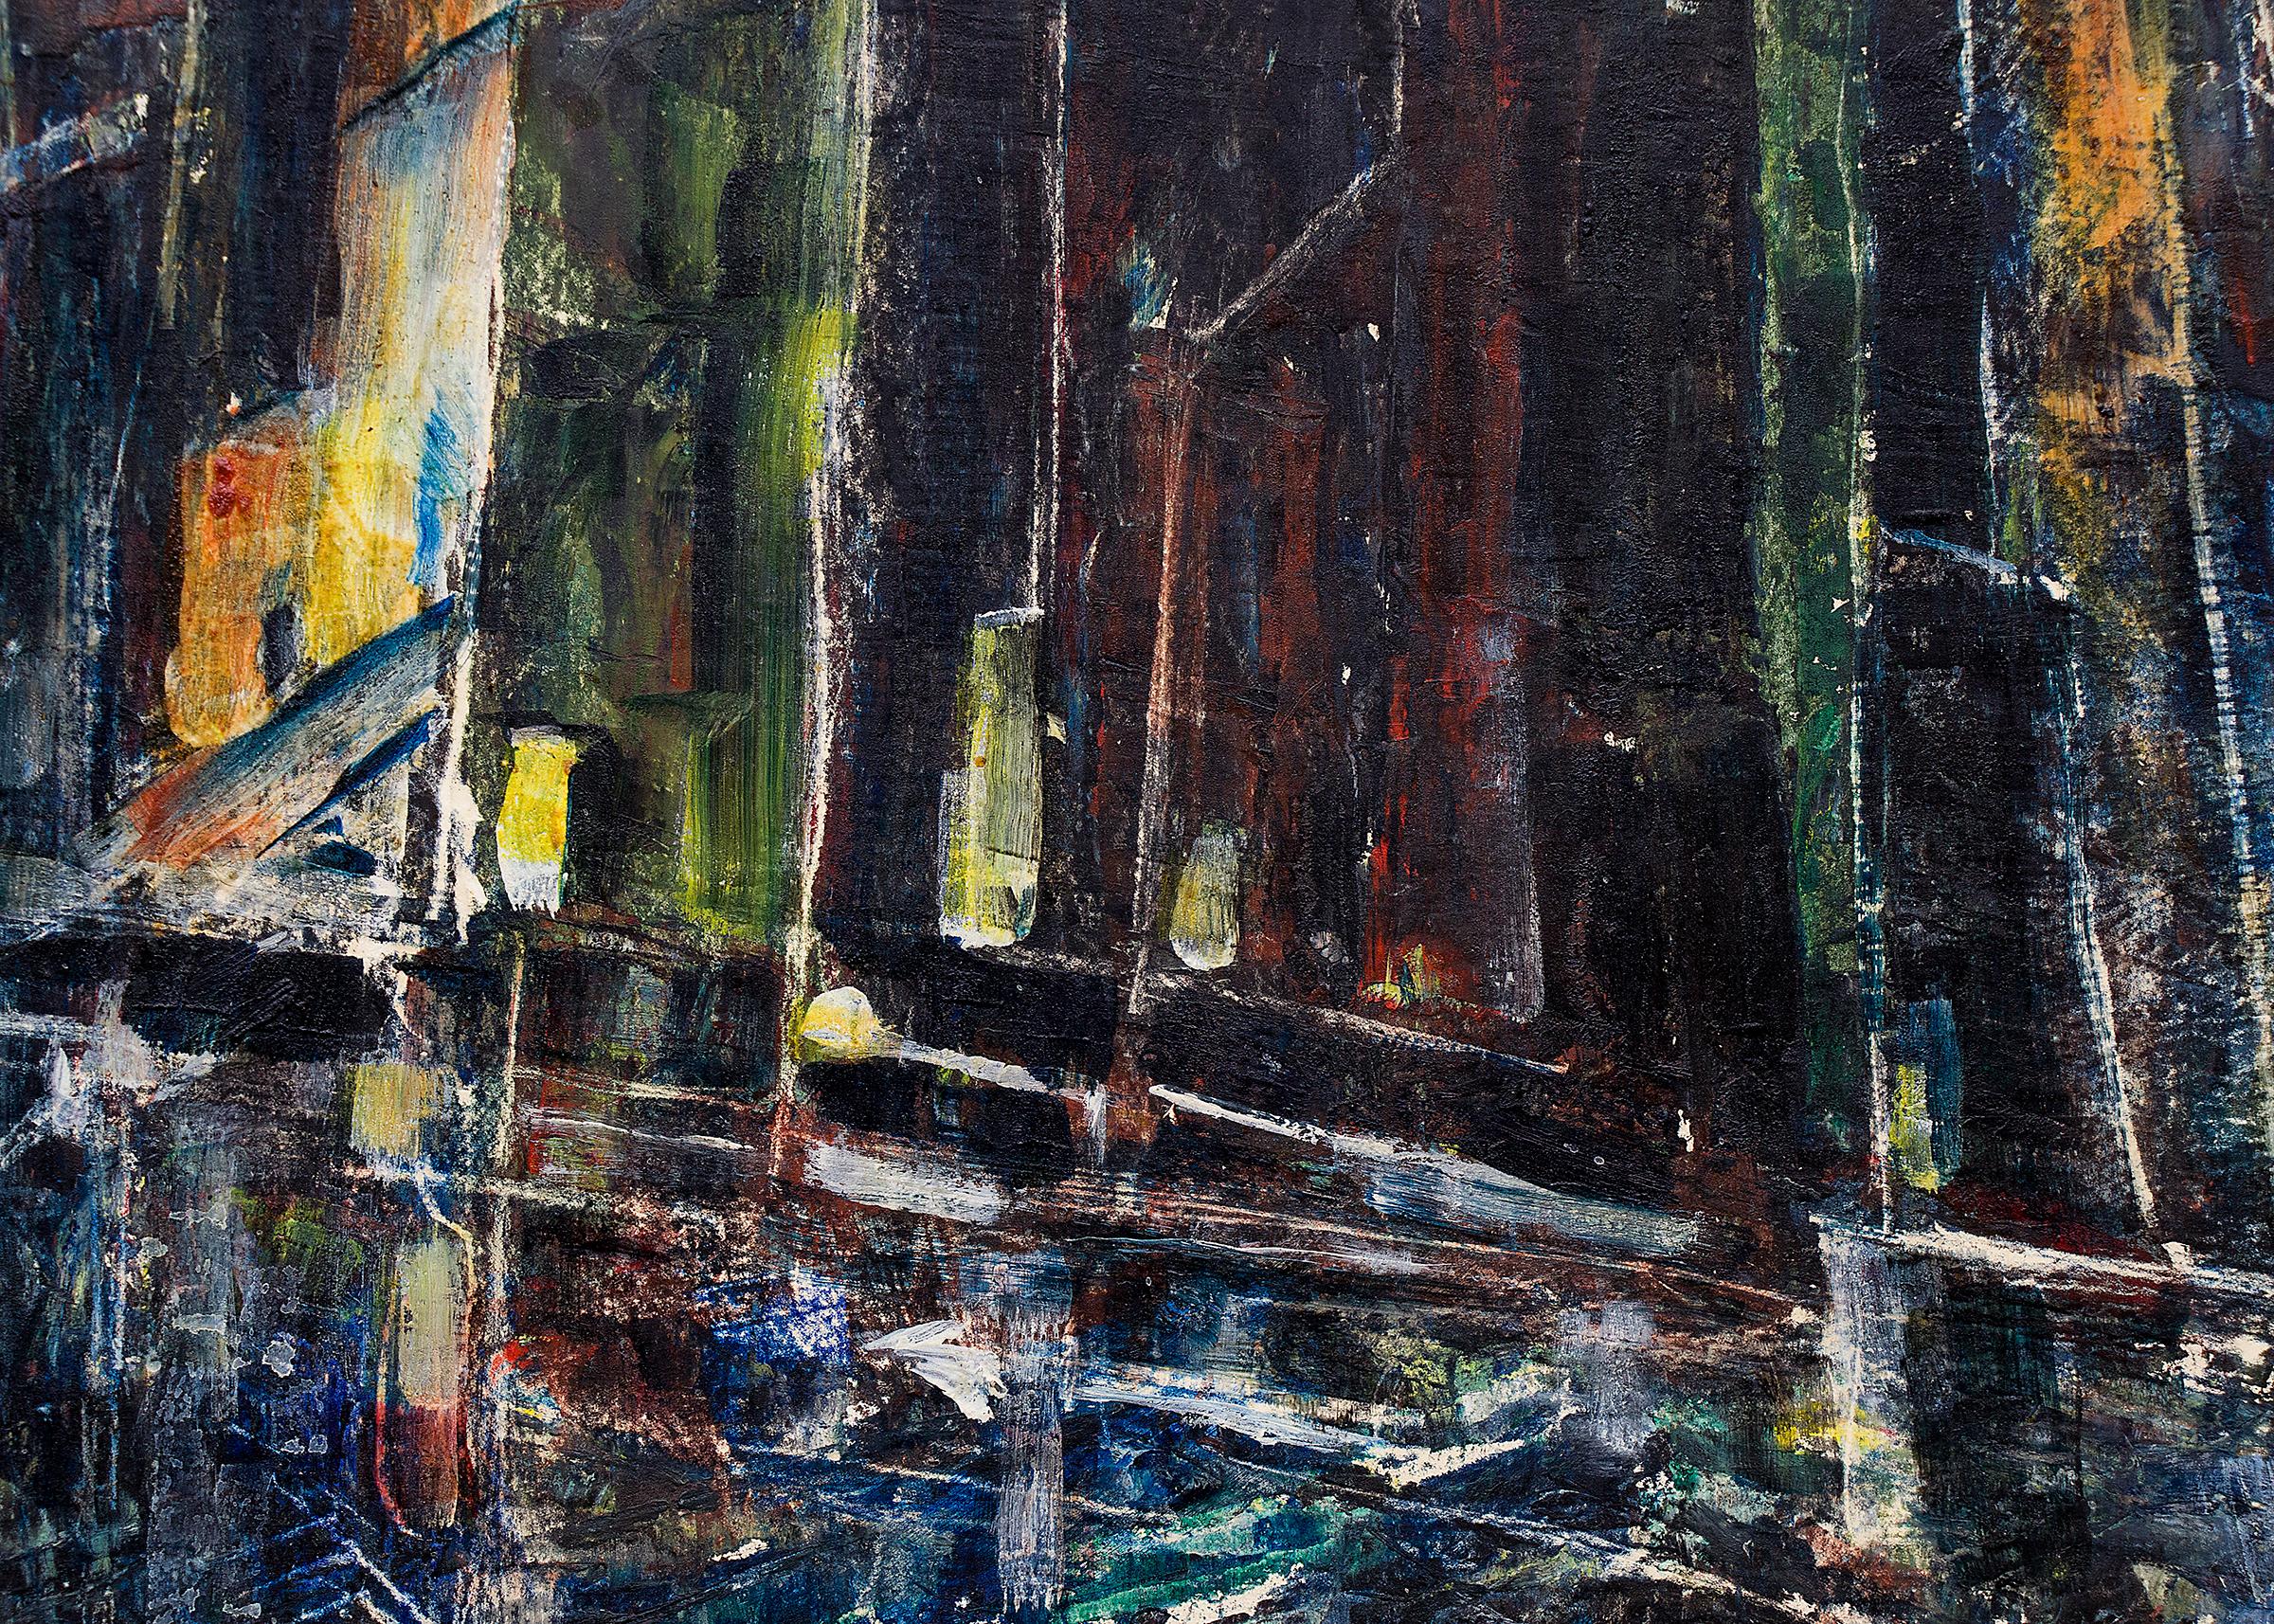 Oil on board painting of abstracted New York City skyline by Charles Ragland Bunnell from 1951. Nocturne cityscape painted in colors of black, shades of blue, and yellow. Presented in a custom black frame, outer dimensions measure 30 ¼ x 12 ¼ x ¾